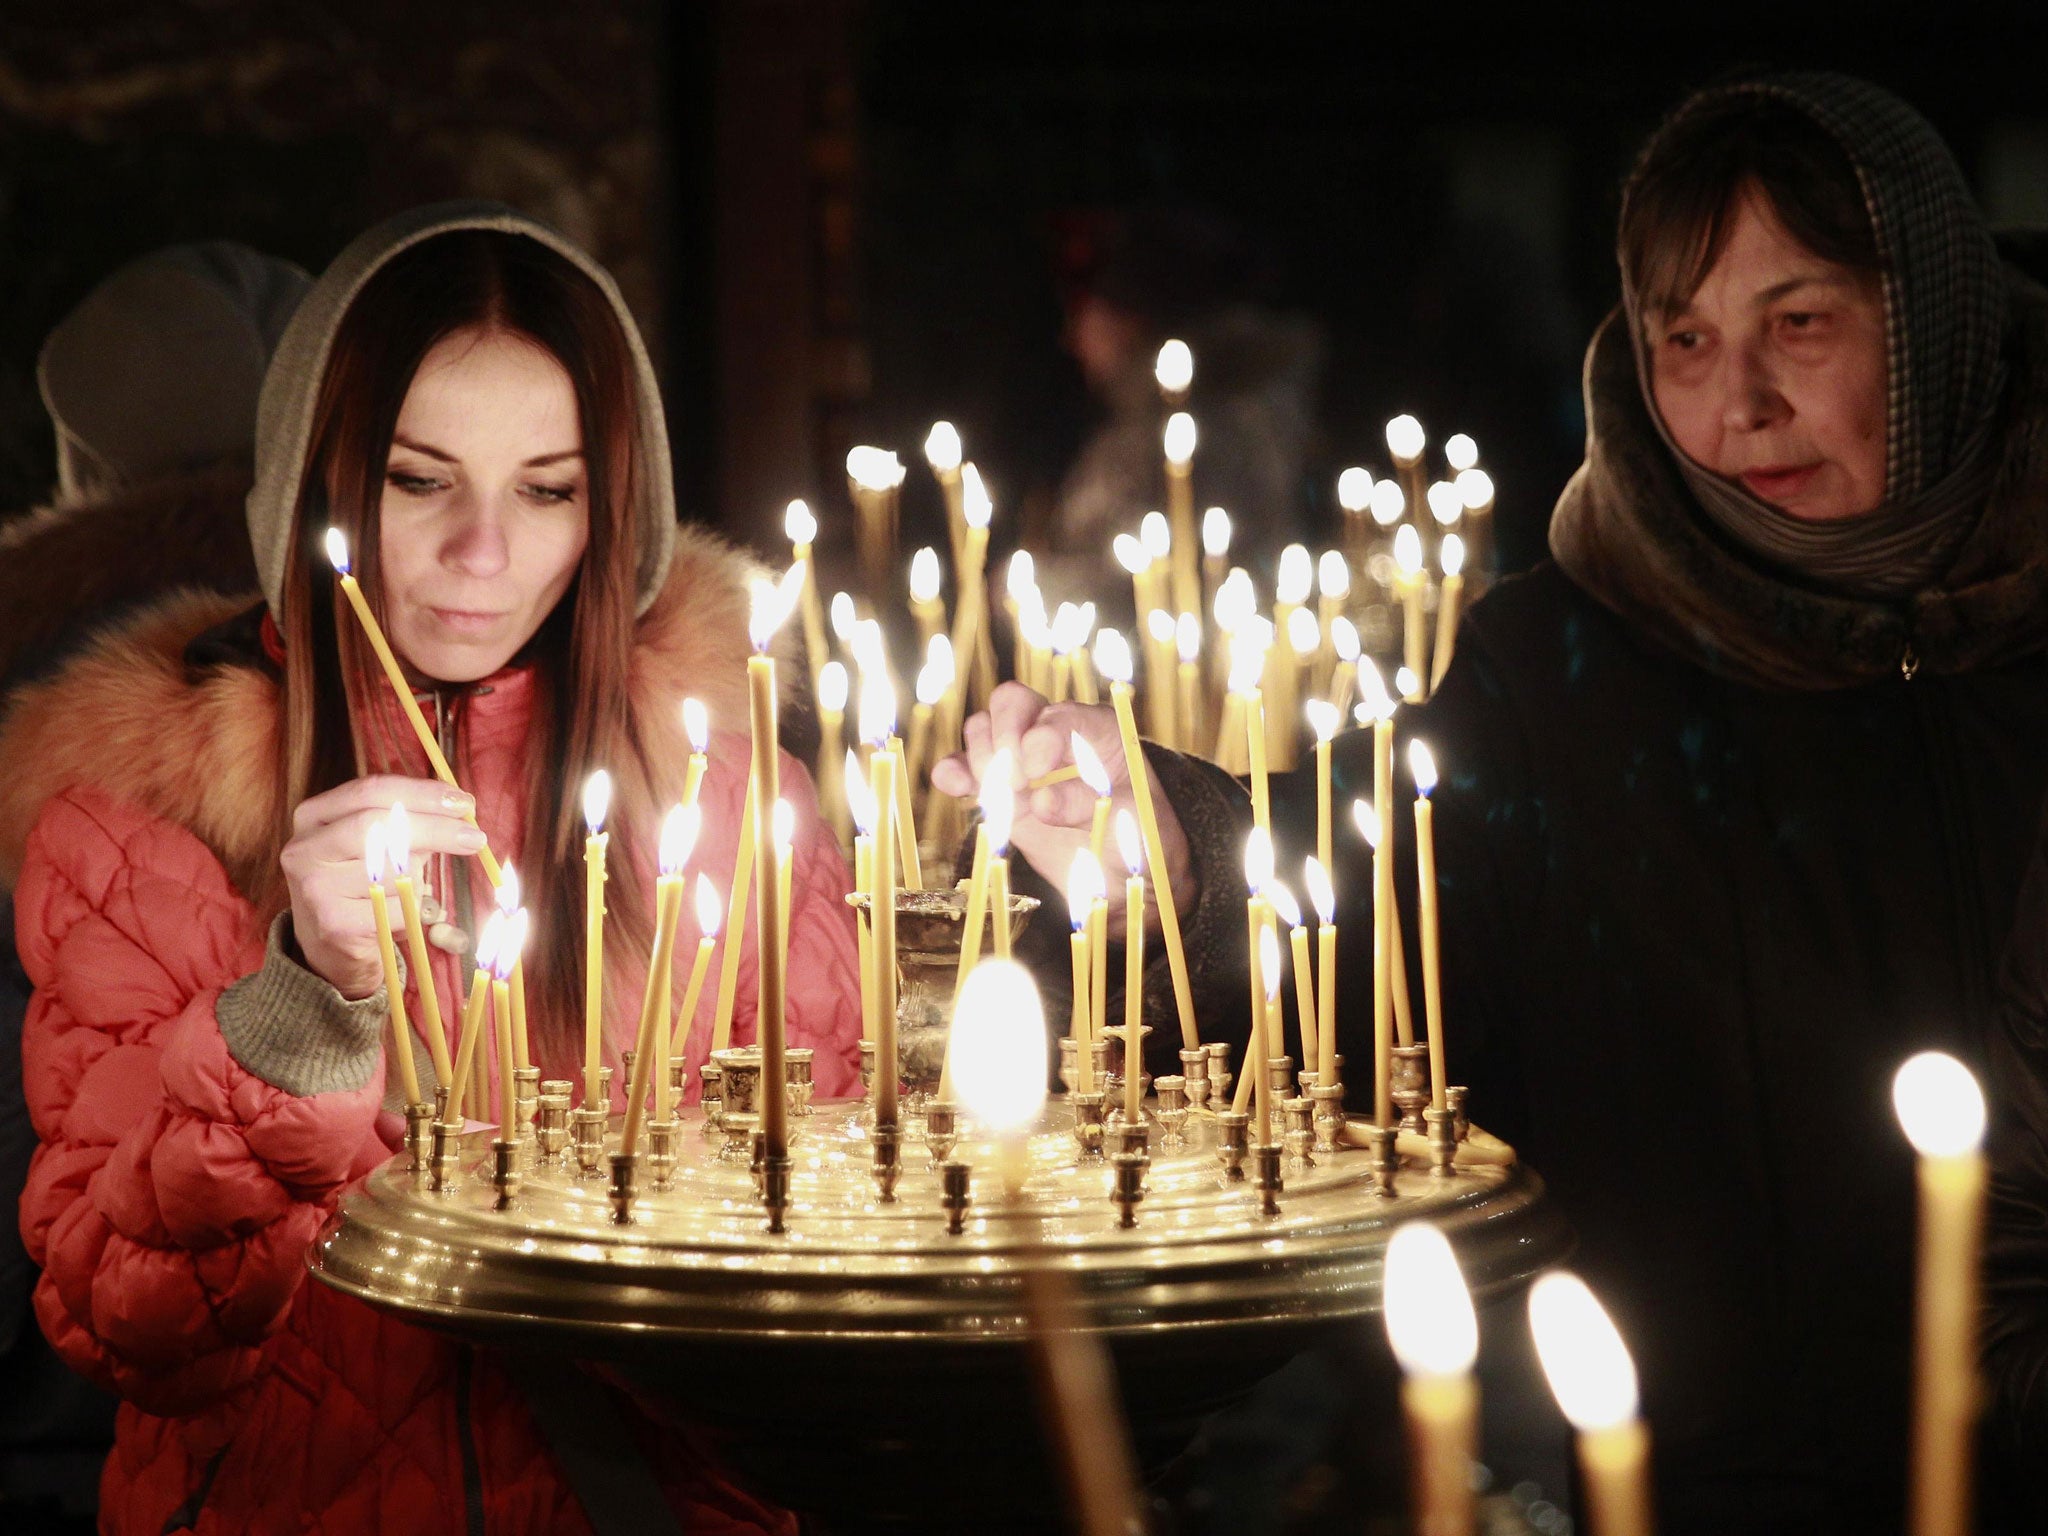 People light candles during a religious service at a church in Kiev